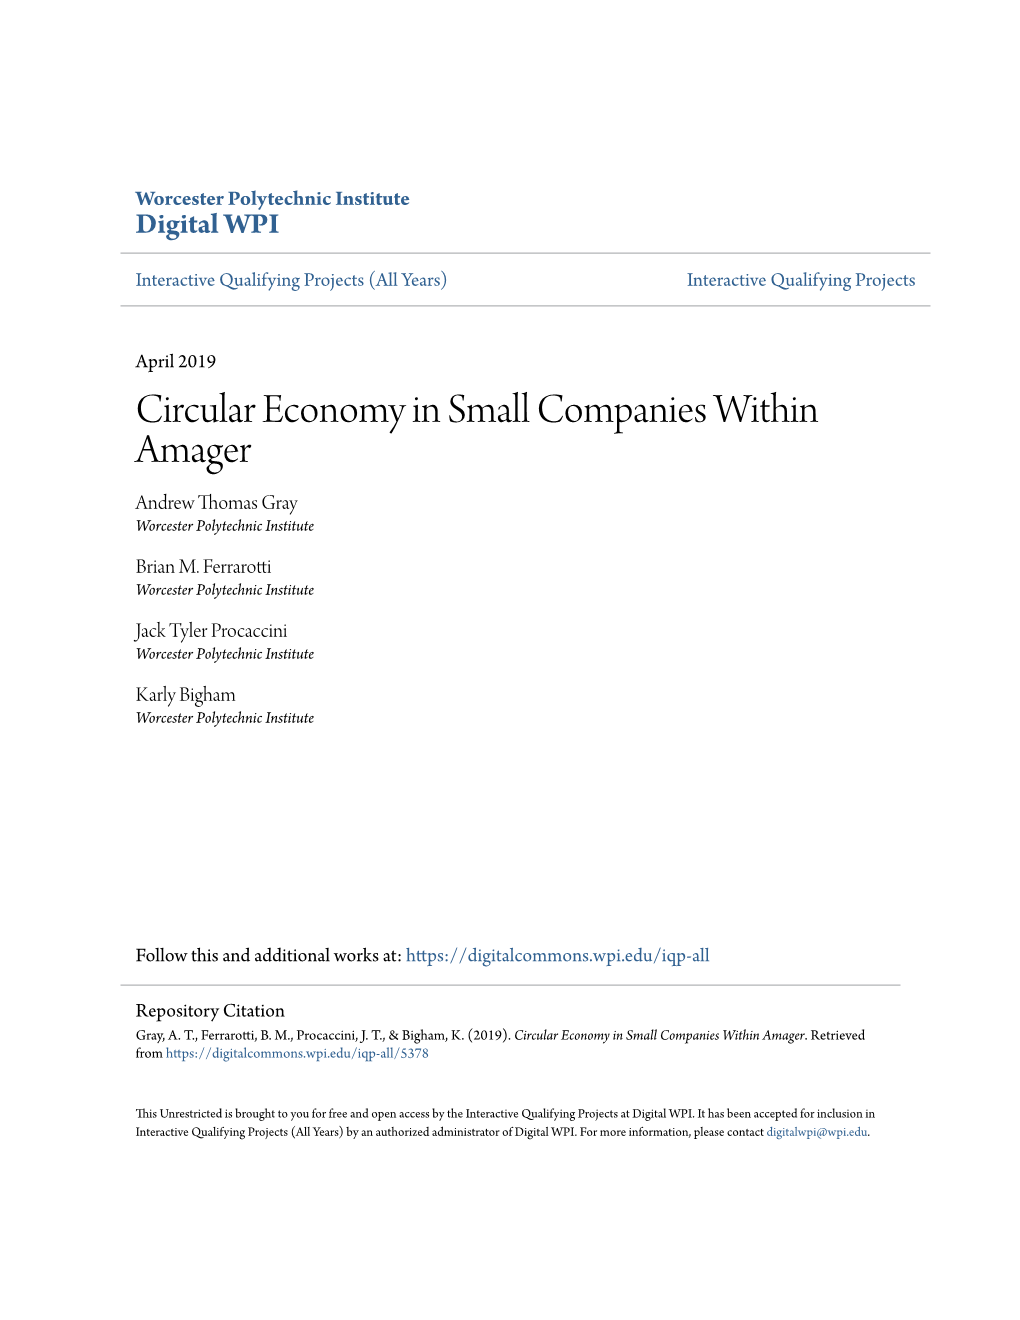 Circular Economy in Small Companies Within Amager Andrew Thomas Gray Worcester Polytechnic Institute